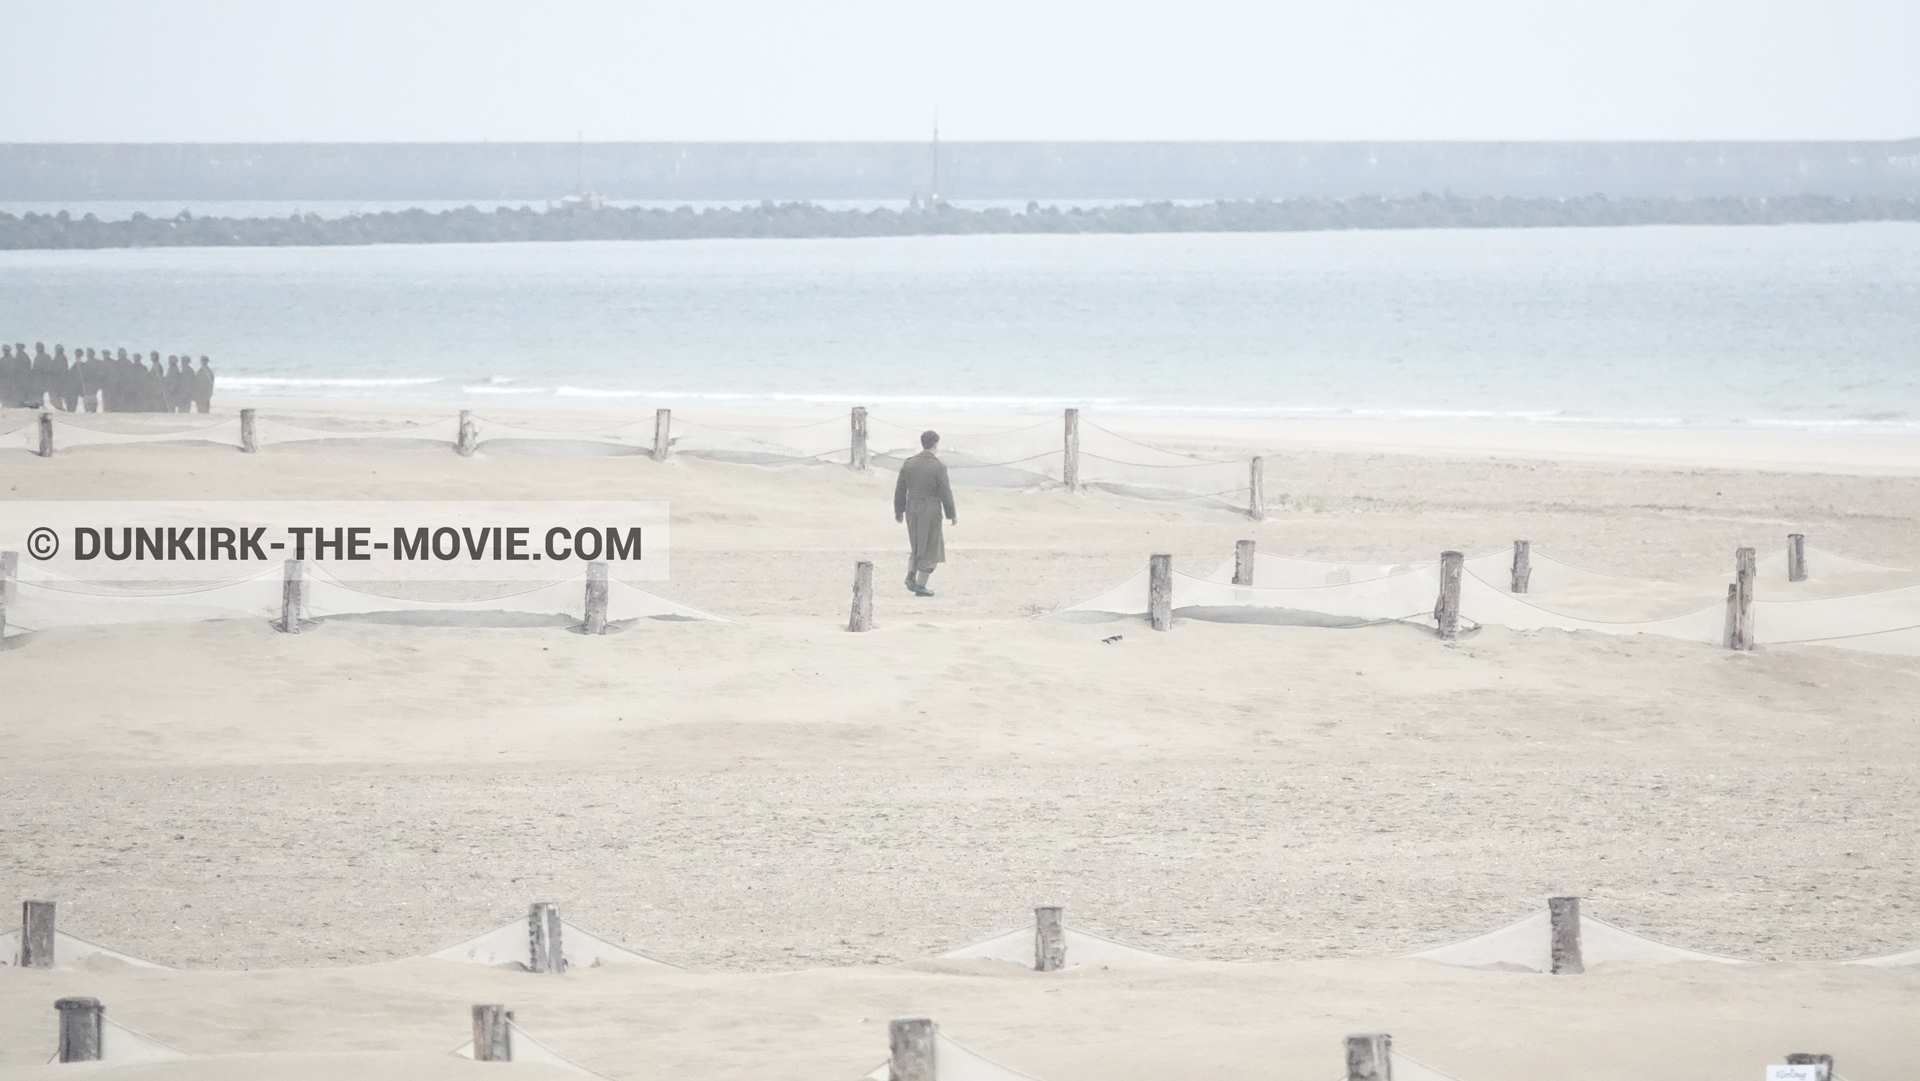 Picture with decor, supernumeraries, beach,  from behind the scene of the Dunkirk movie by Nolan